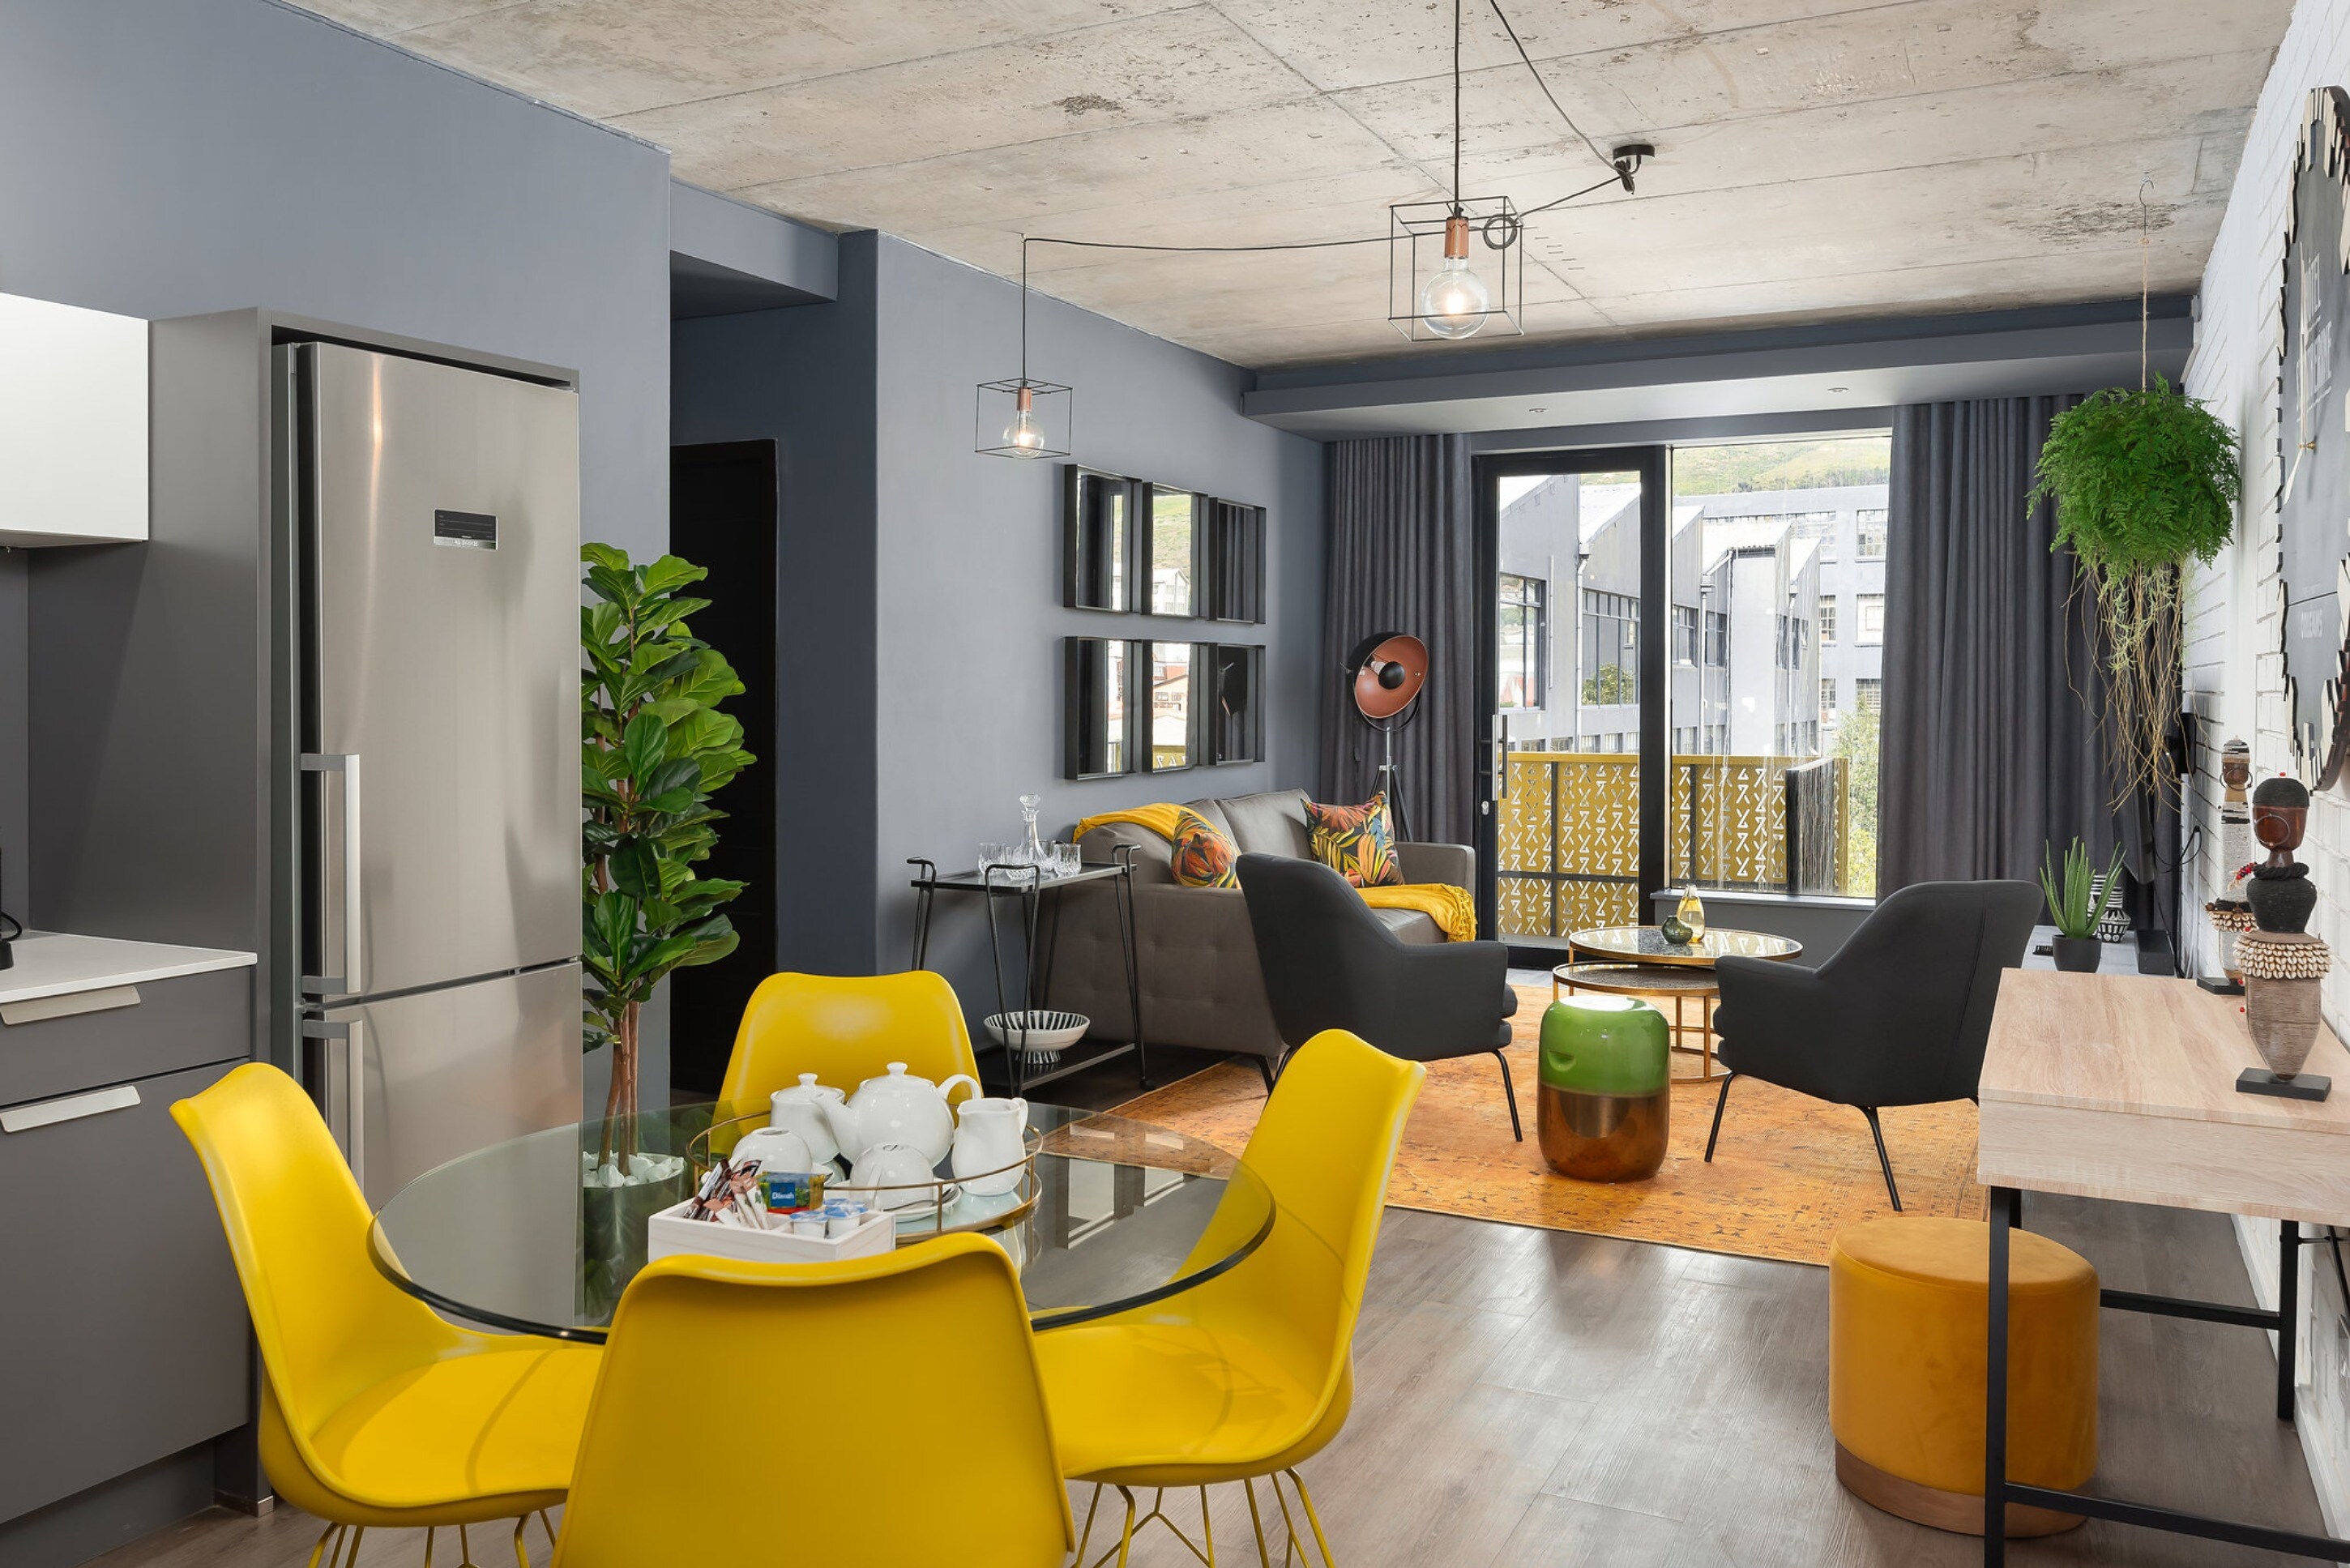 Property Image 1 - Trendy Vibrant Apartment in the Heart of Woodstock